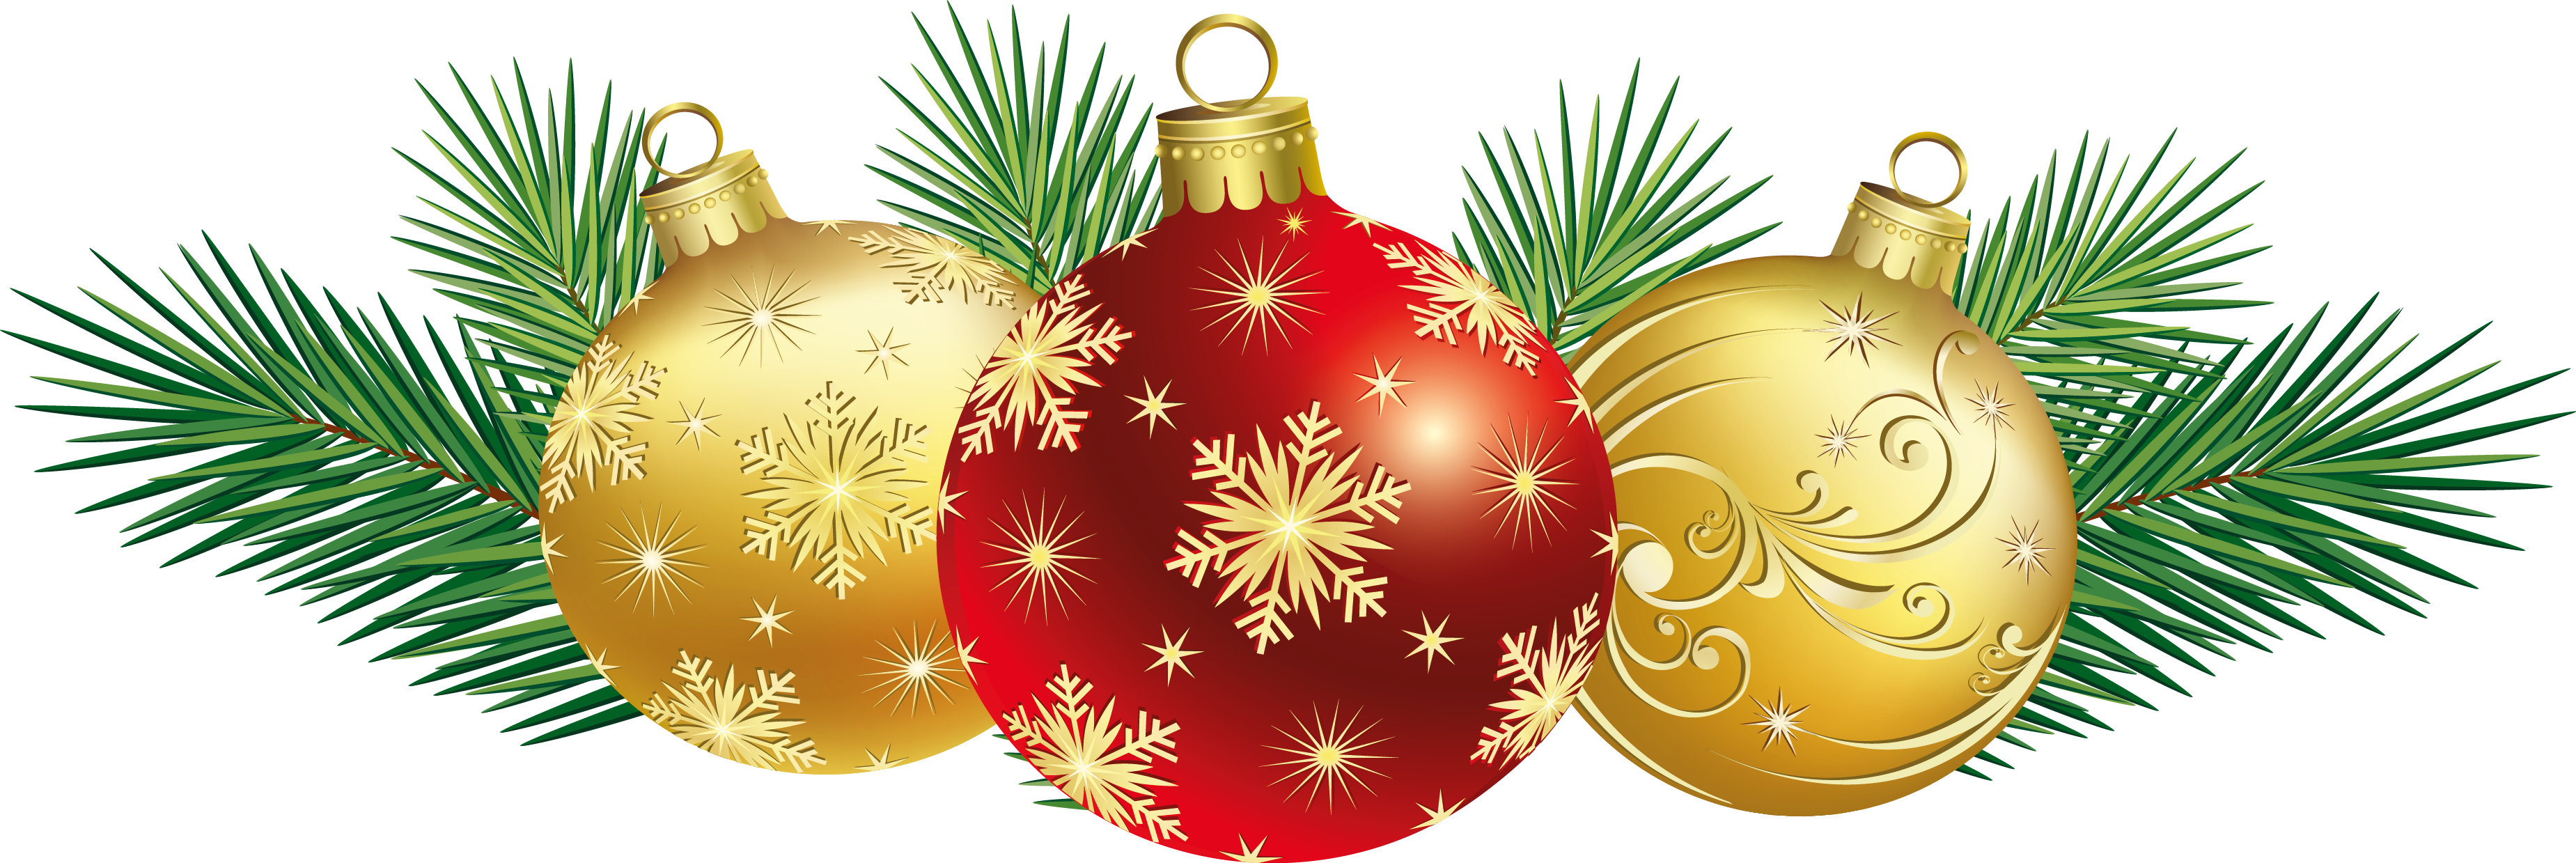 Ornaments Clipart Pictures .